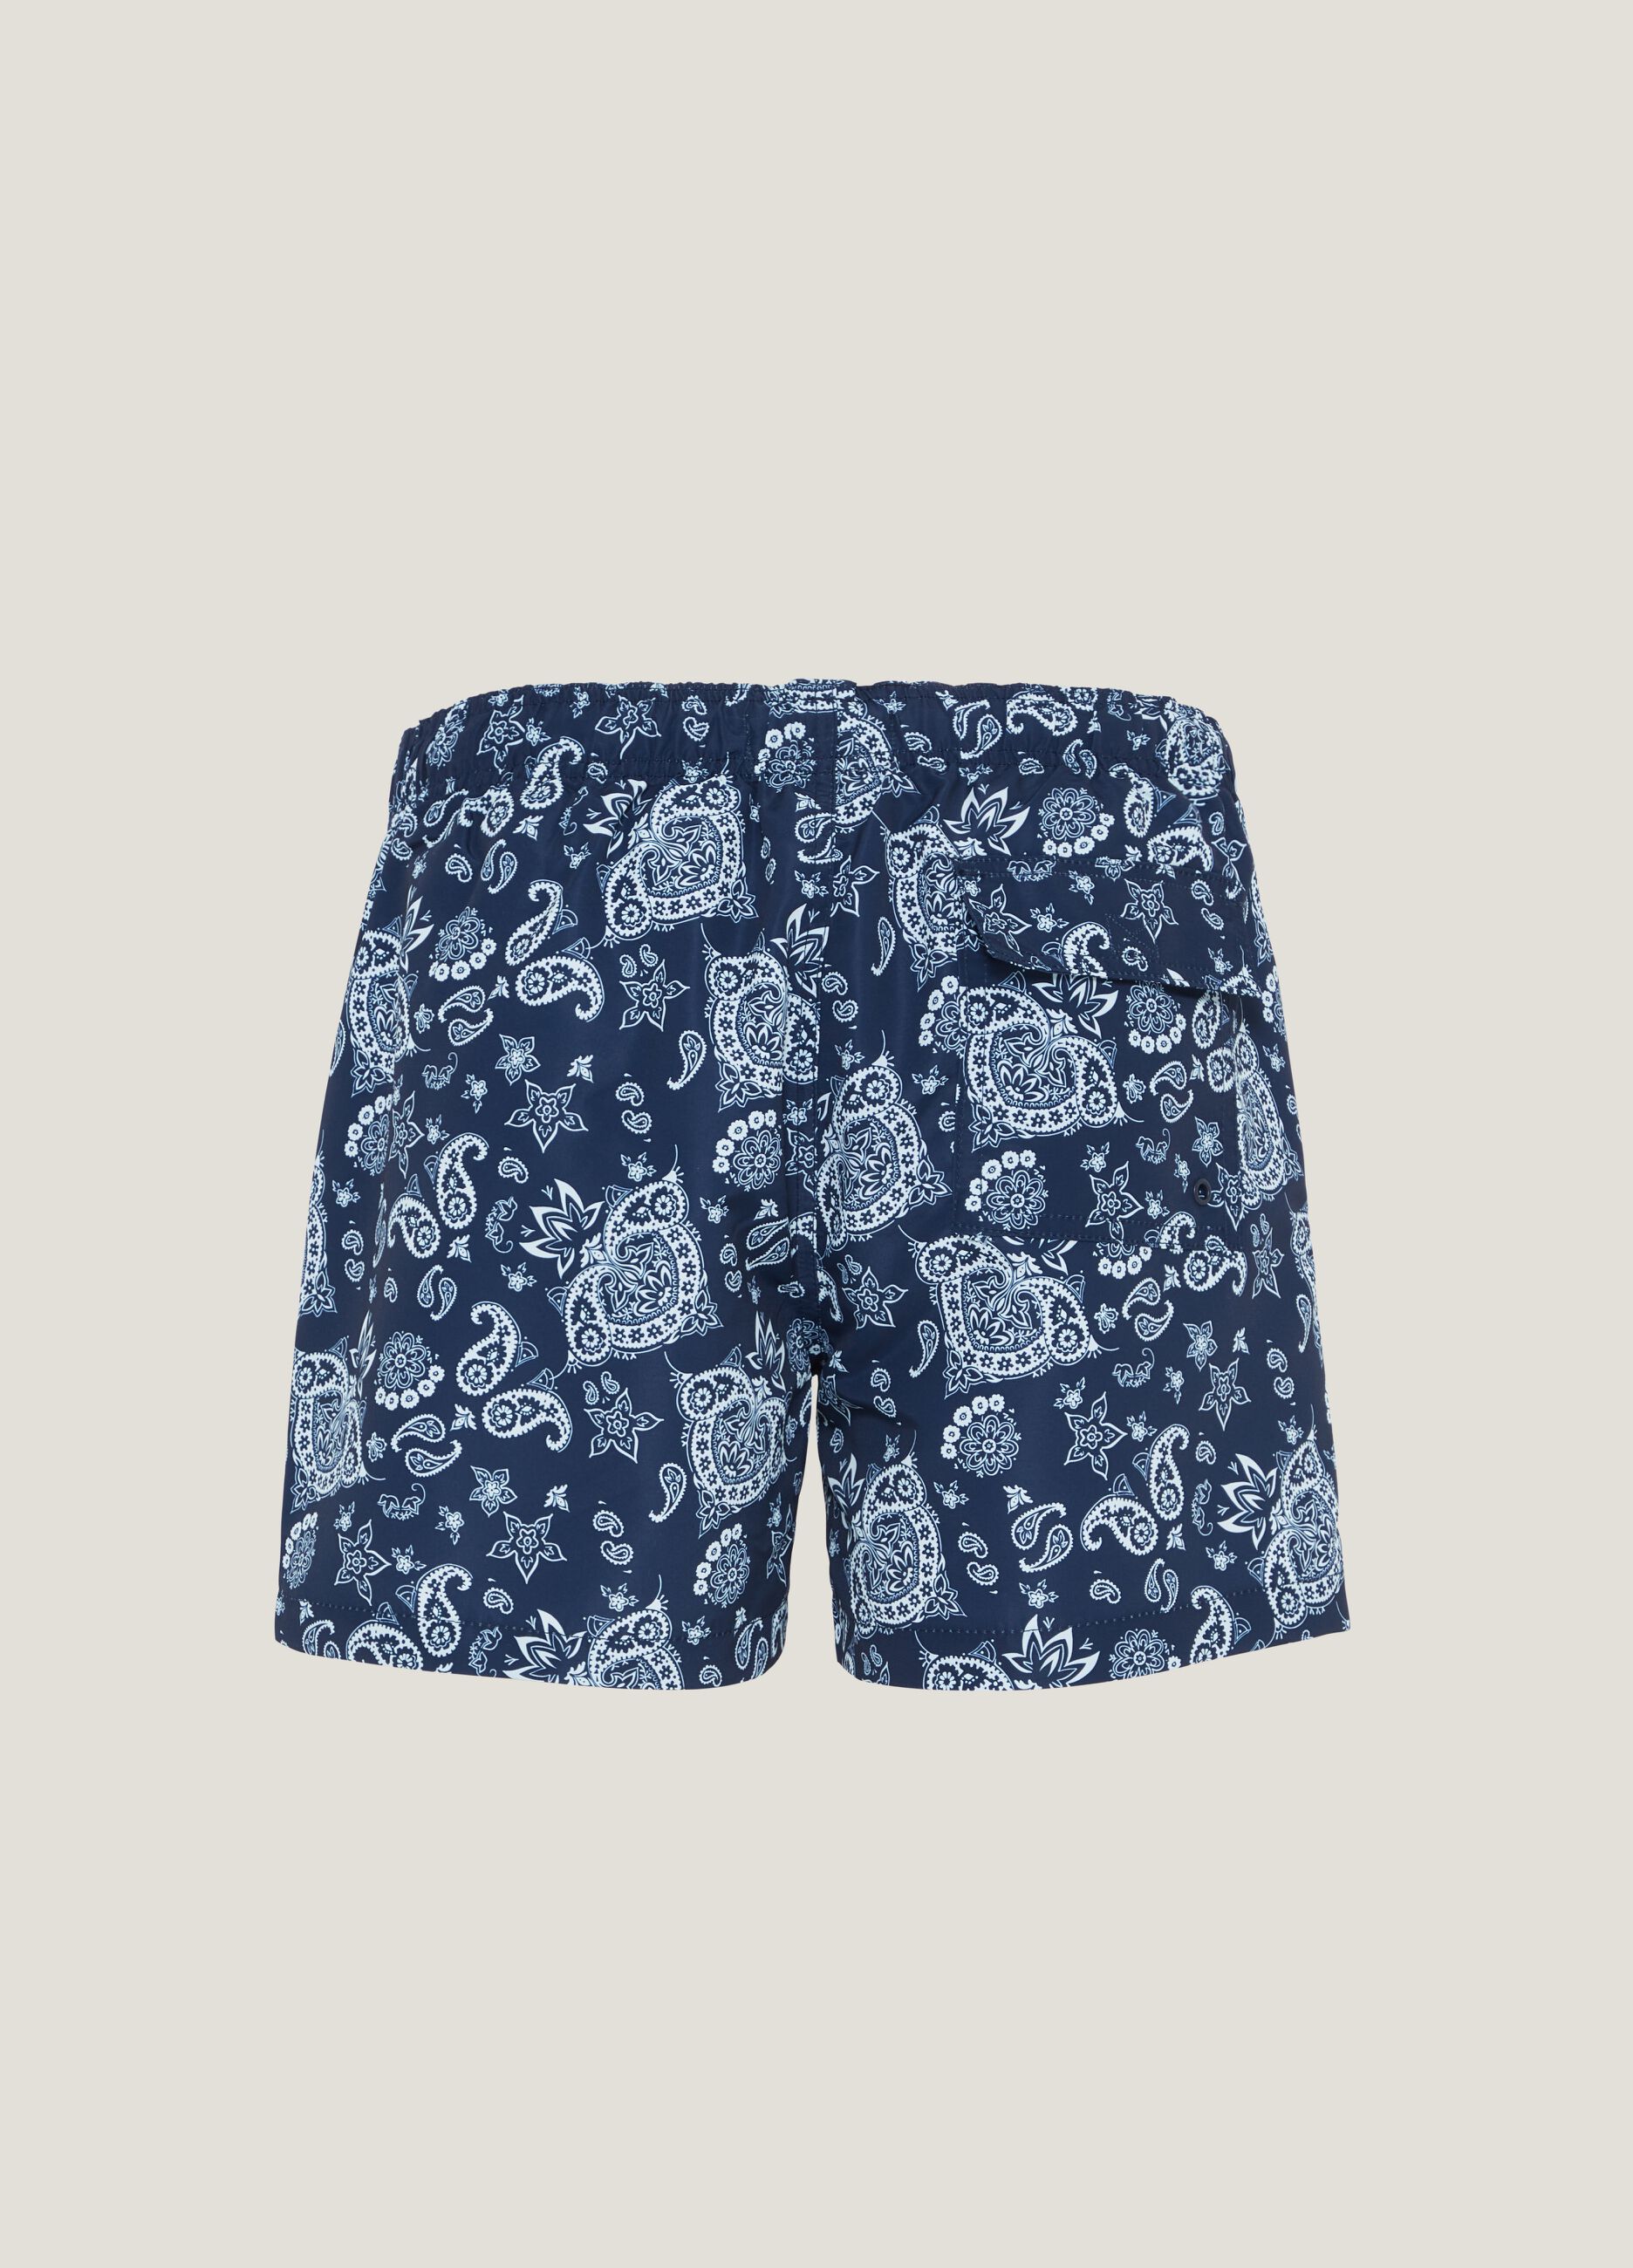 Swimming trunks with cashmere pattern